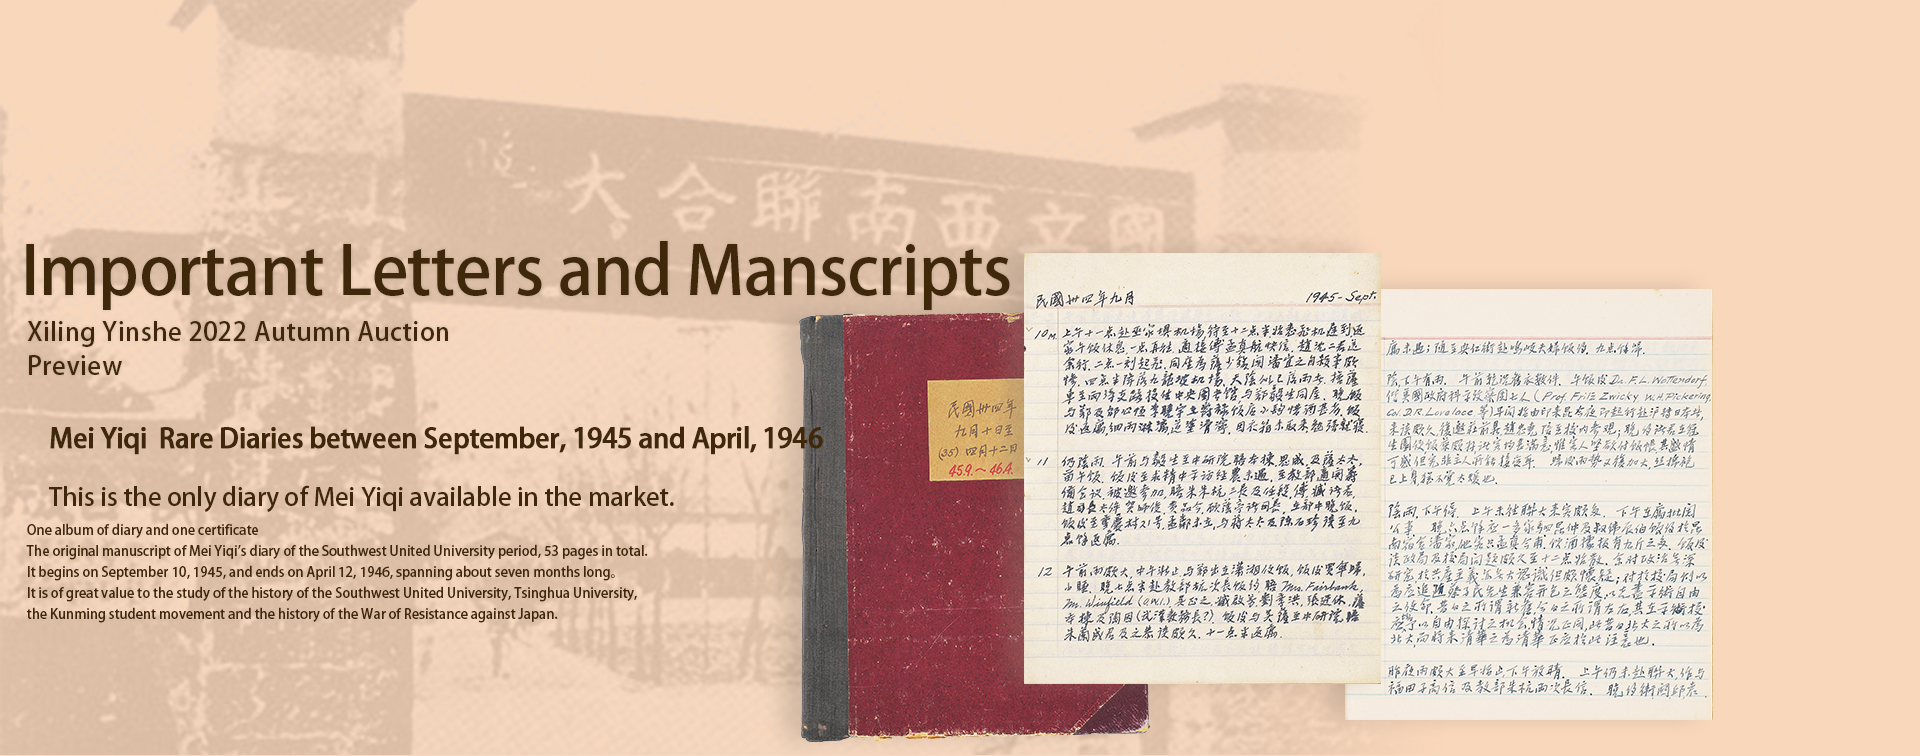 Xiling Yinshe 2022 Autumn Auction | Important Letters and Manuscripts